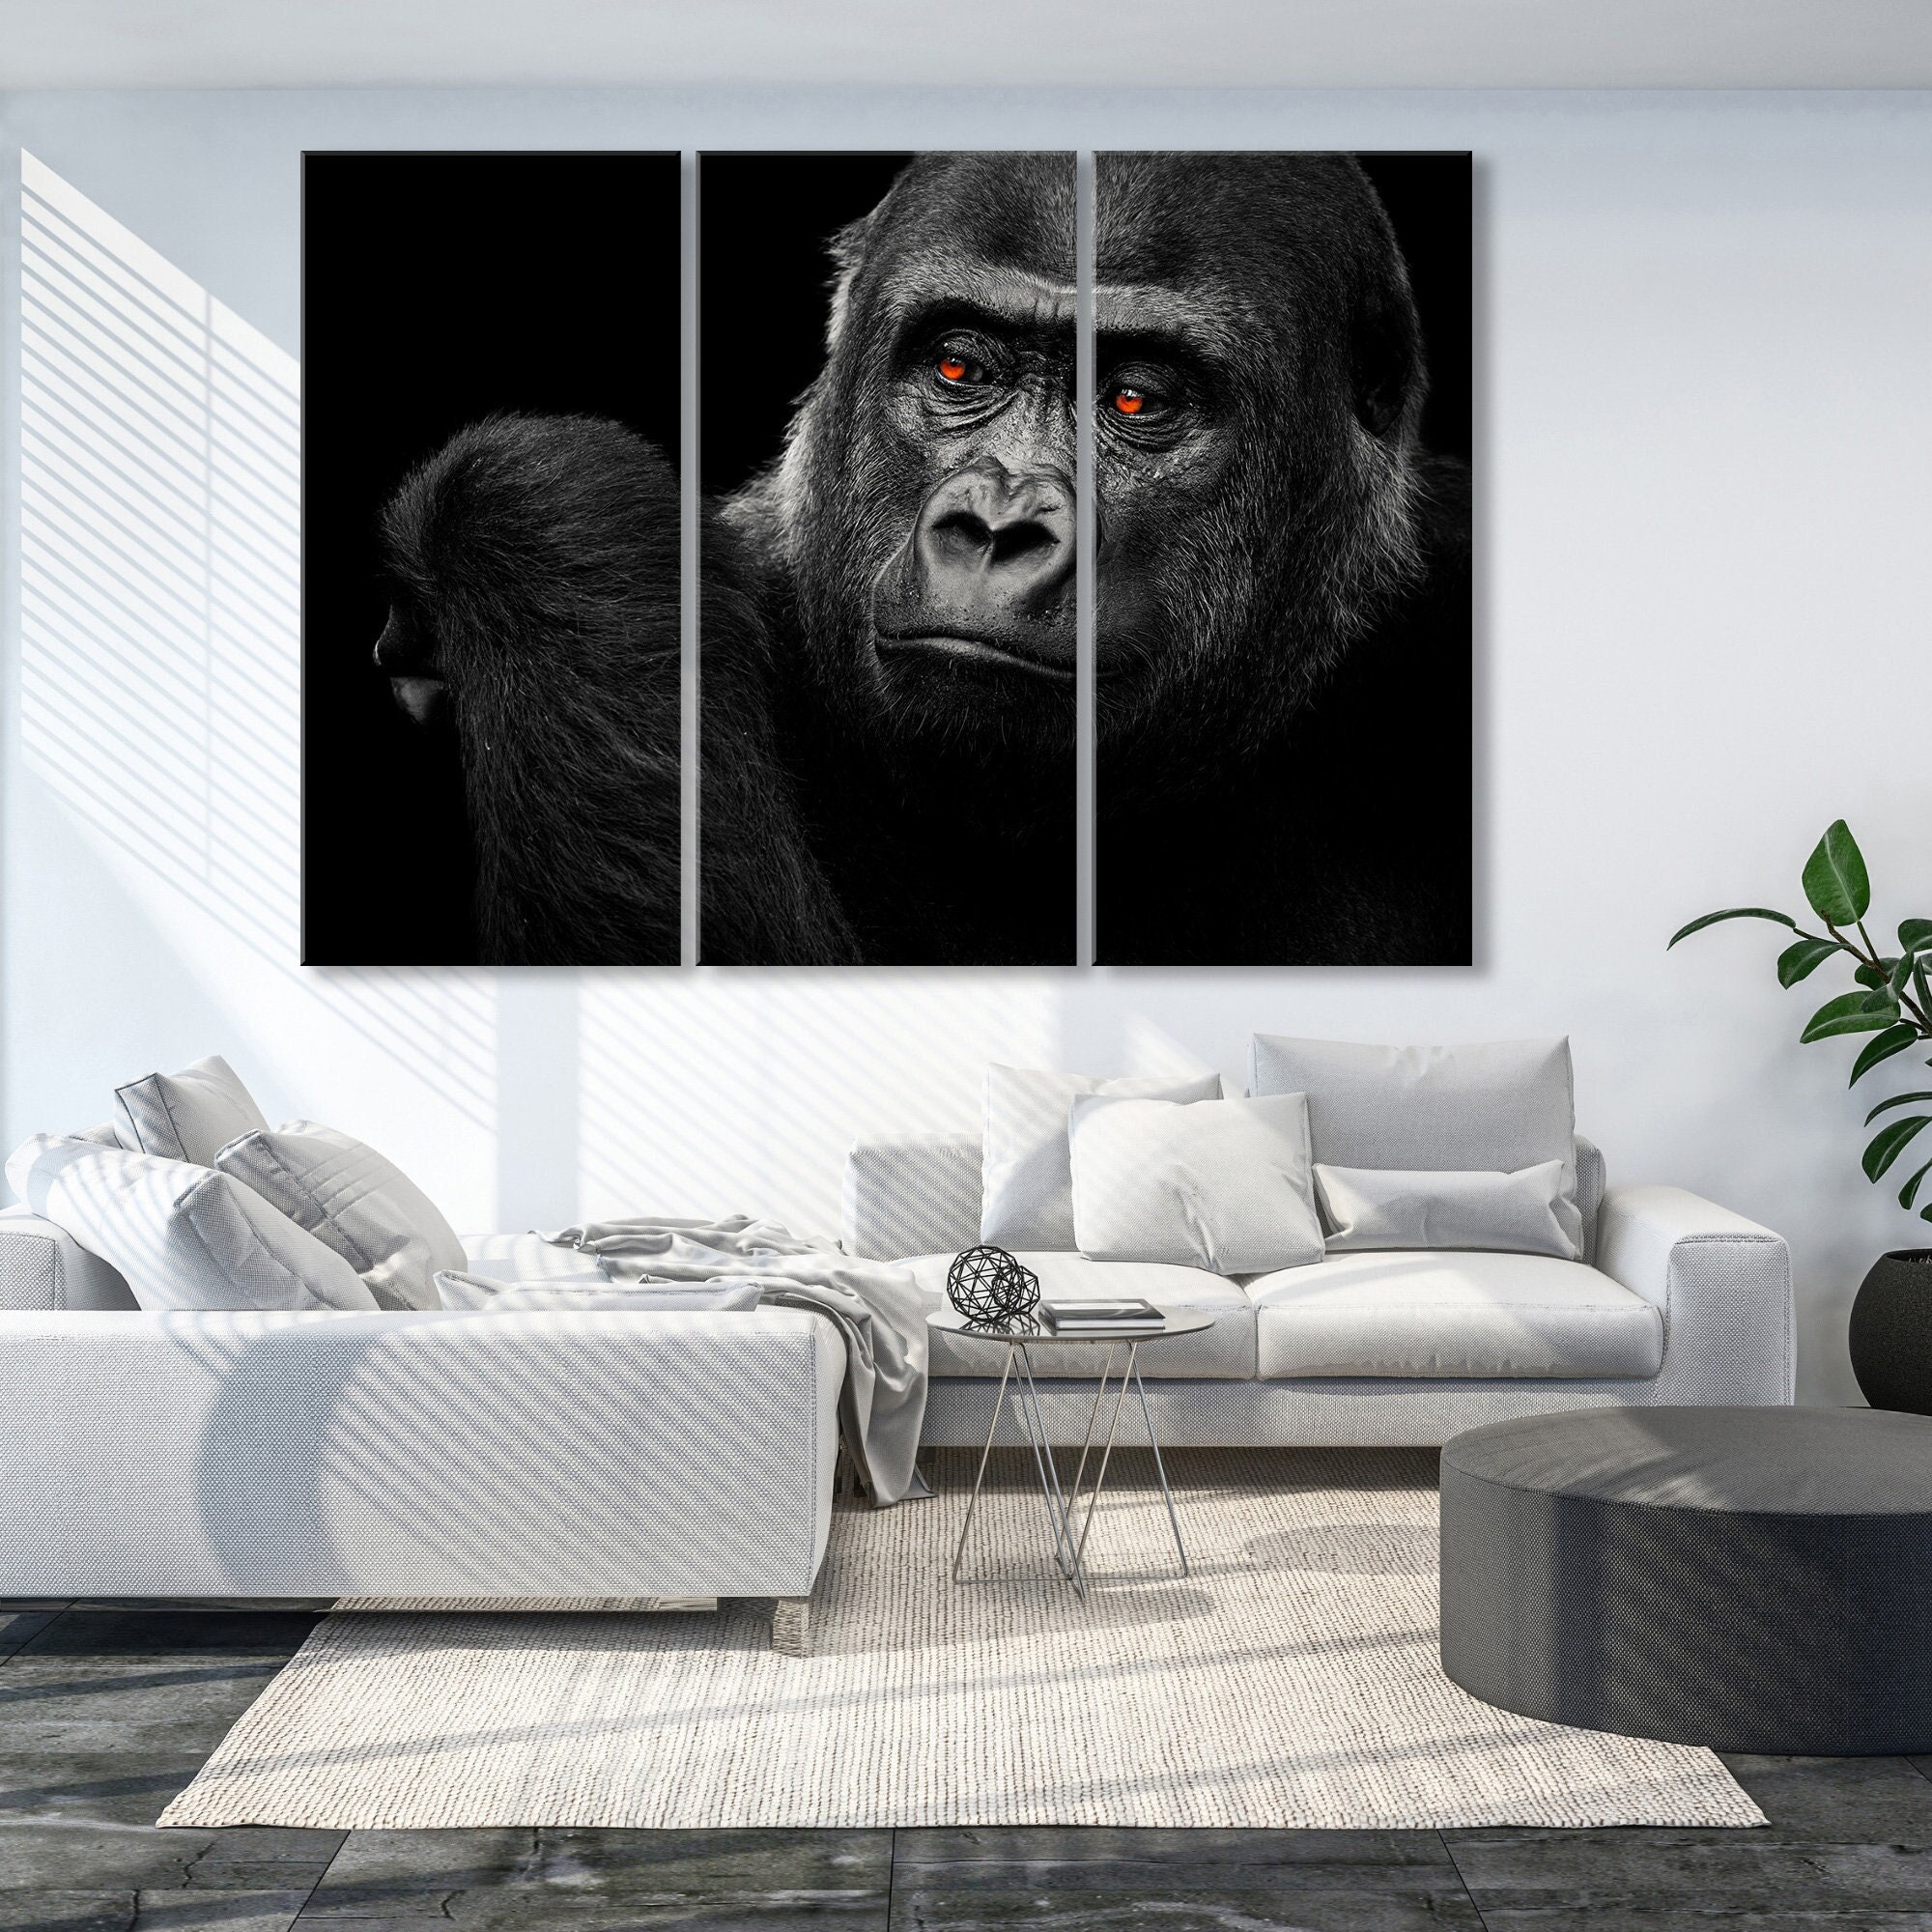 Gorilla Stretched Canvas Print Framed Wall Art Kids Room Decor Painting Animal